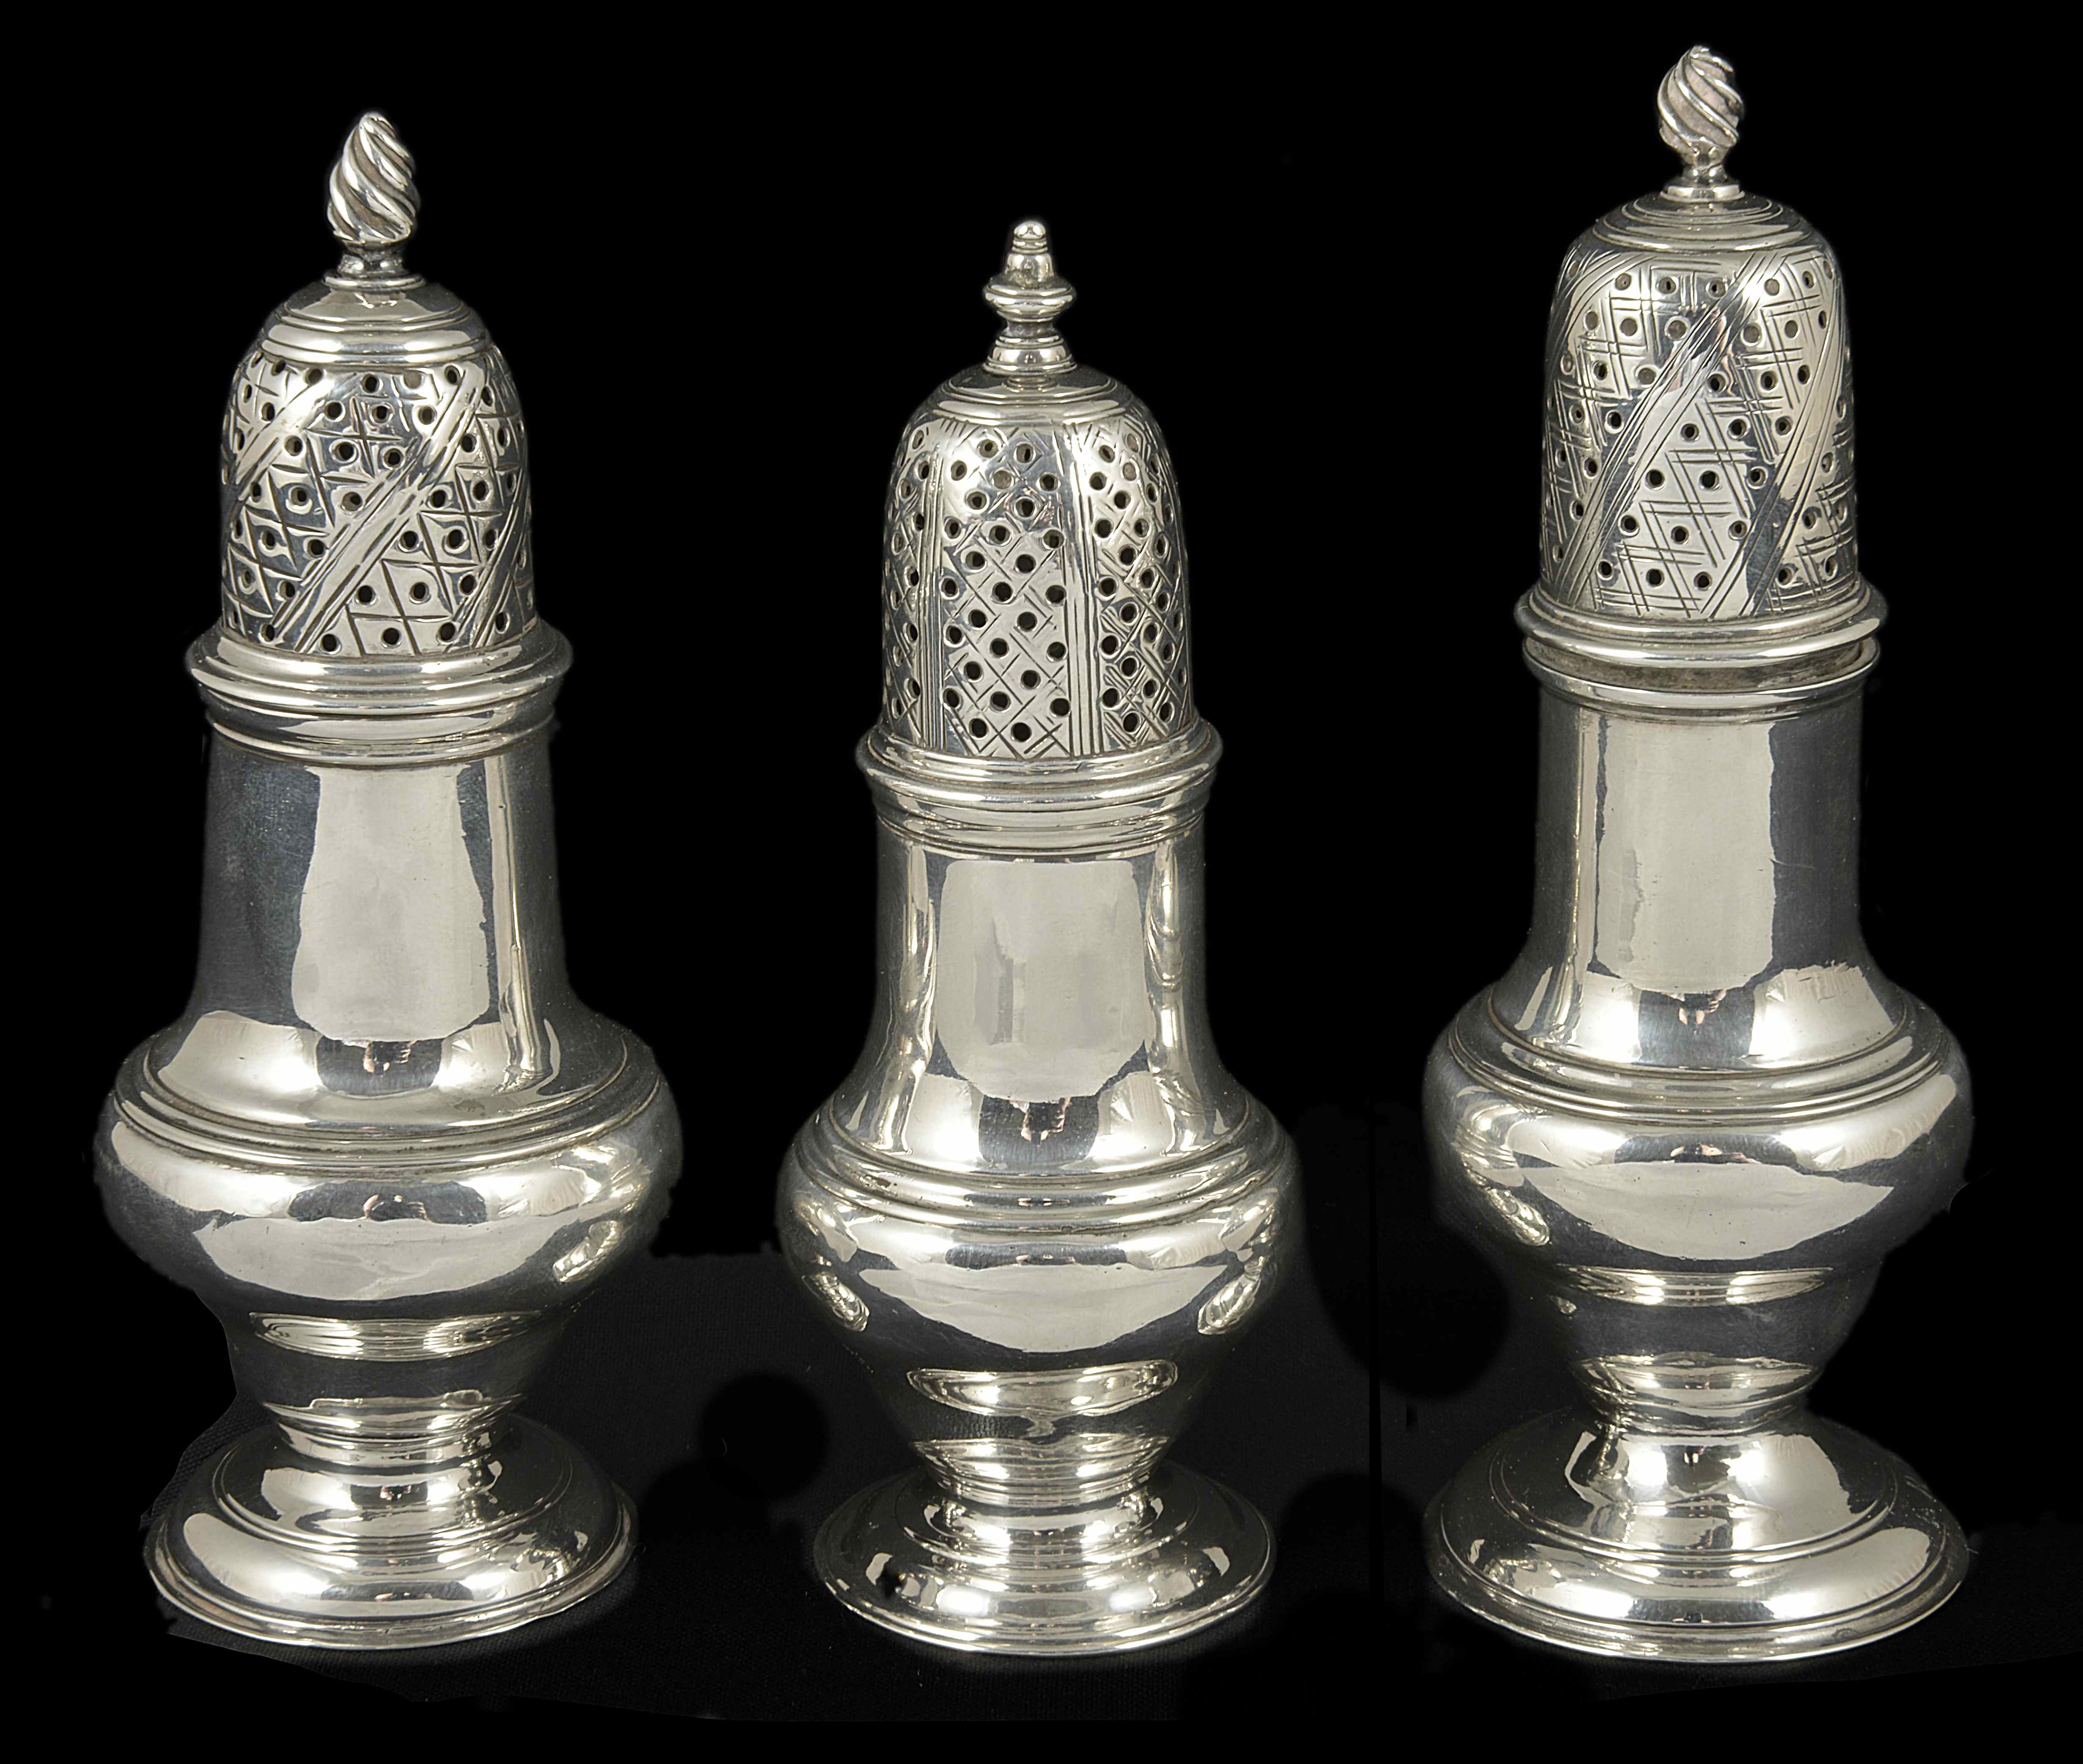 Three George III silver casters, London 1759/1767/1775 each of typical baluster form with wrythen